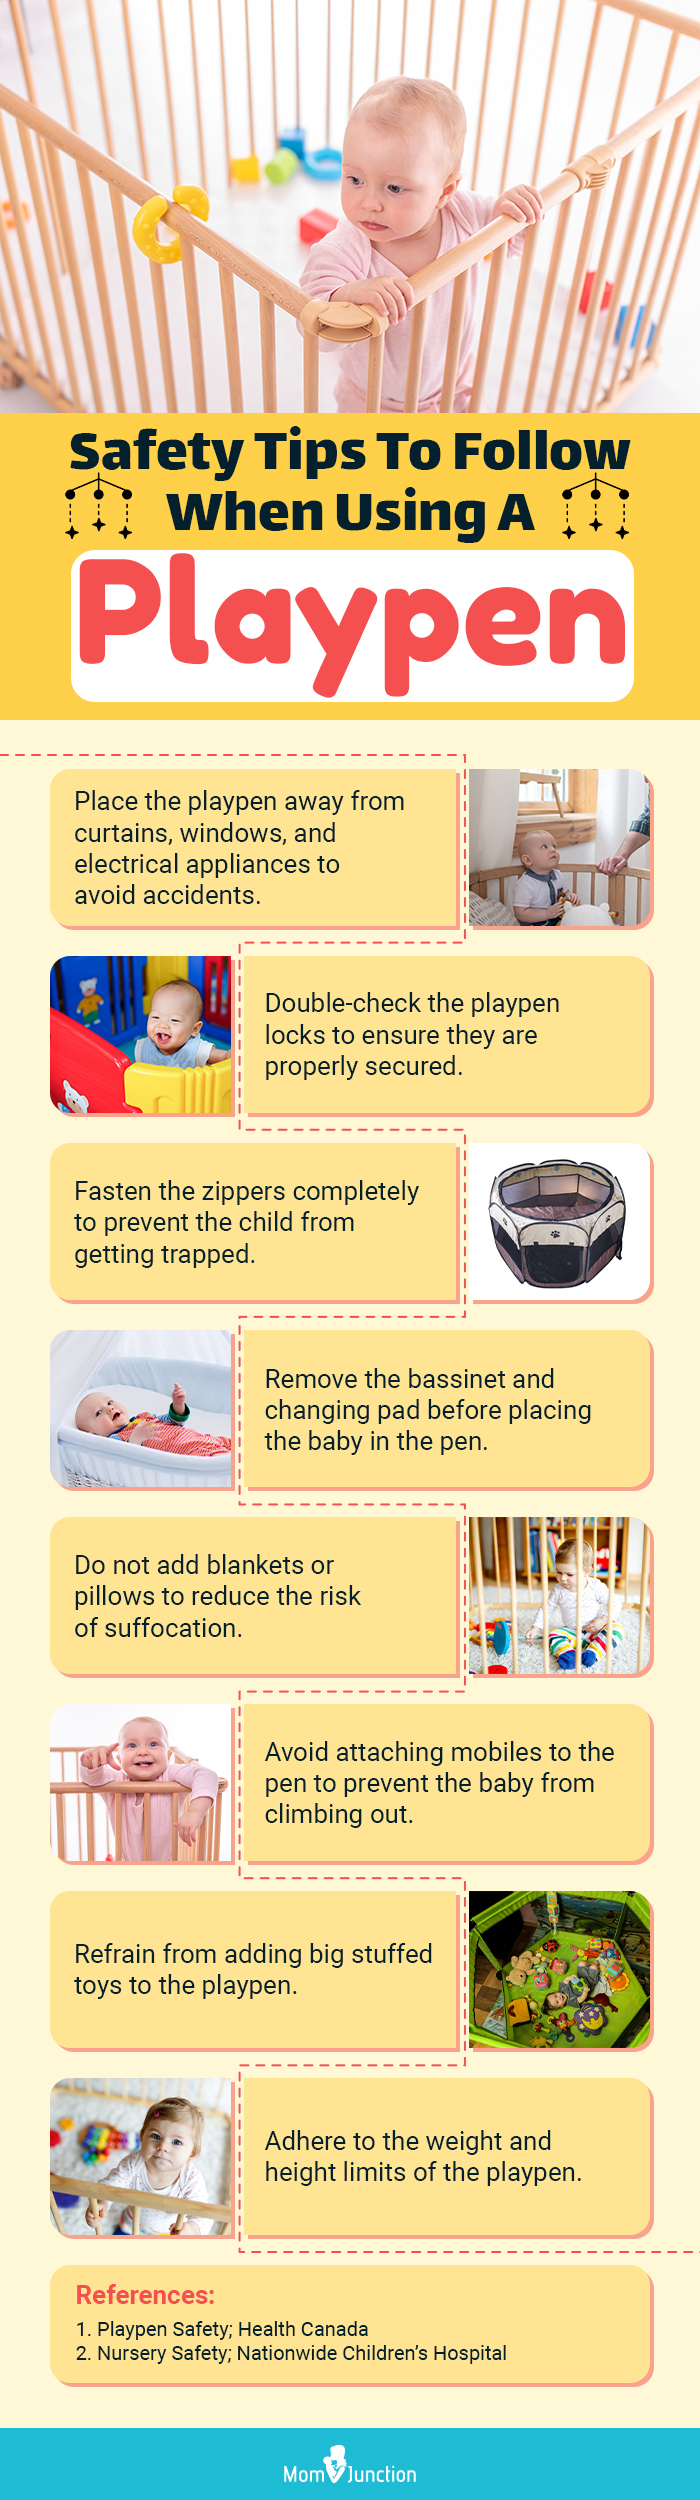 Safety Tips To Follow When Using A Playpen (infographic)